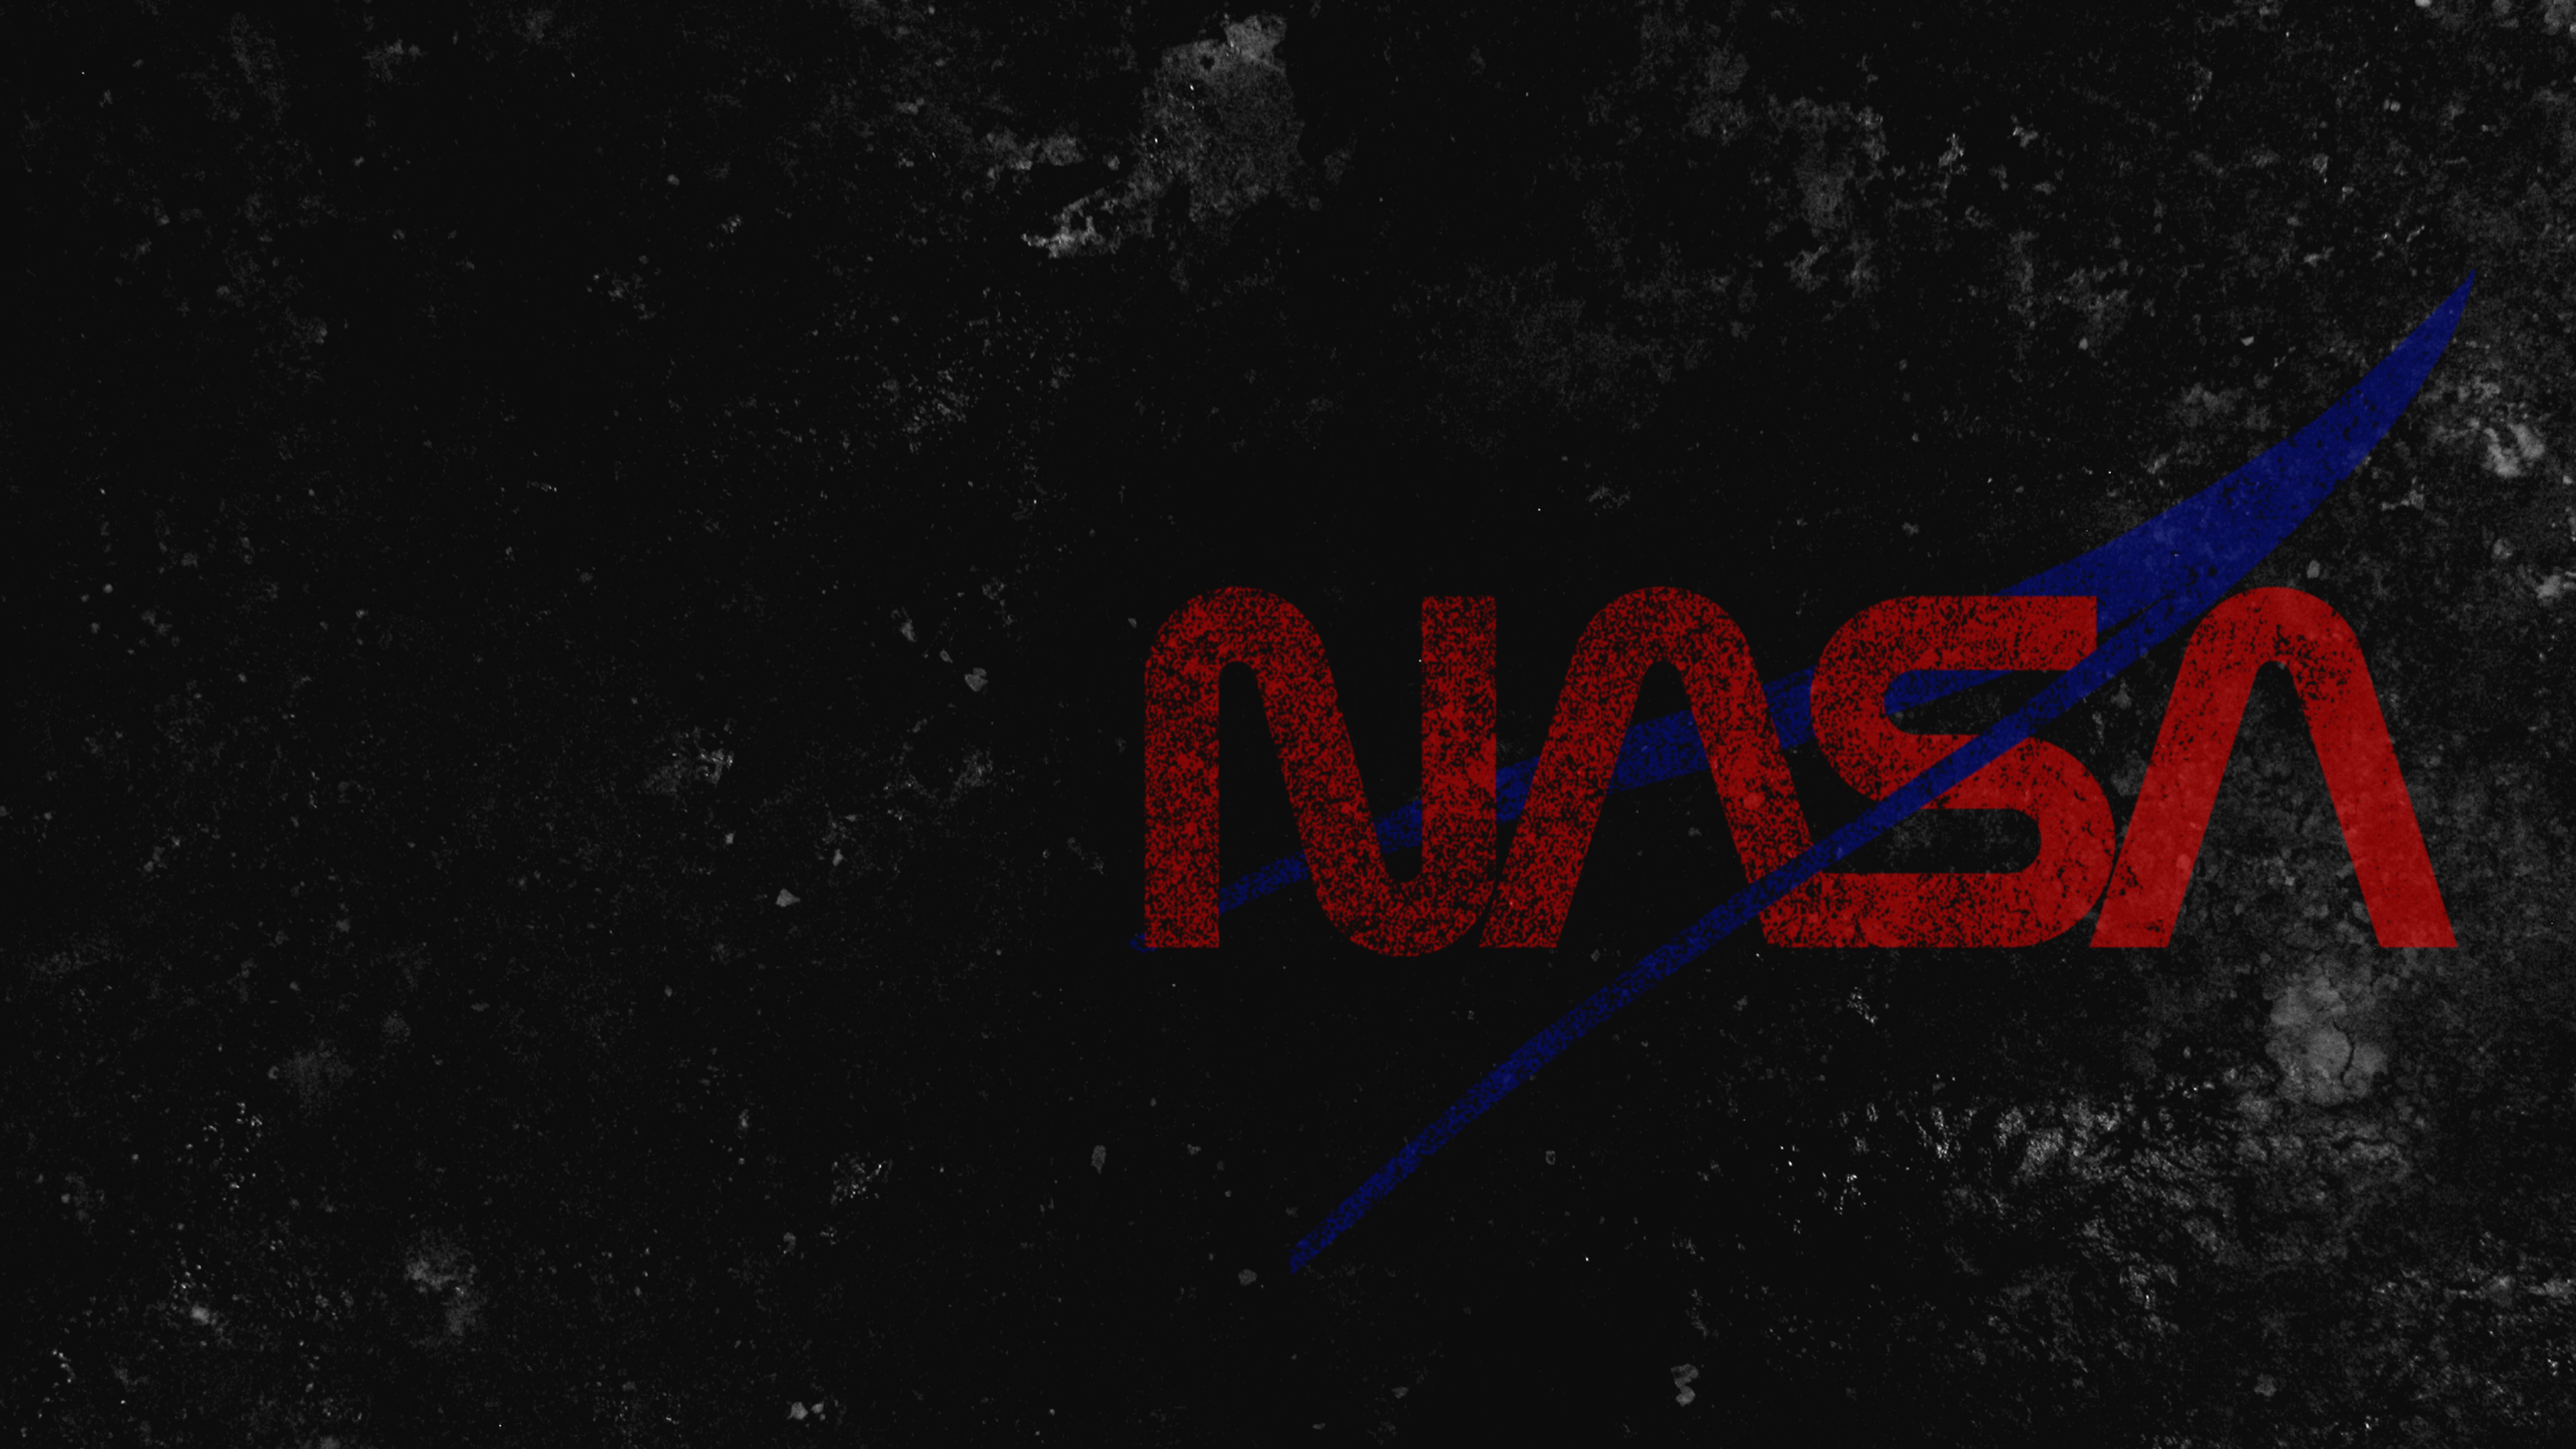 General 3840x2160 NASA space black red blue universe text